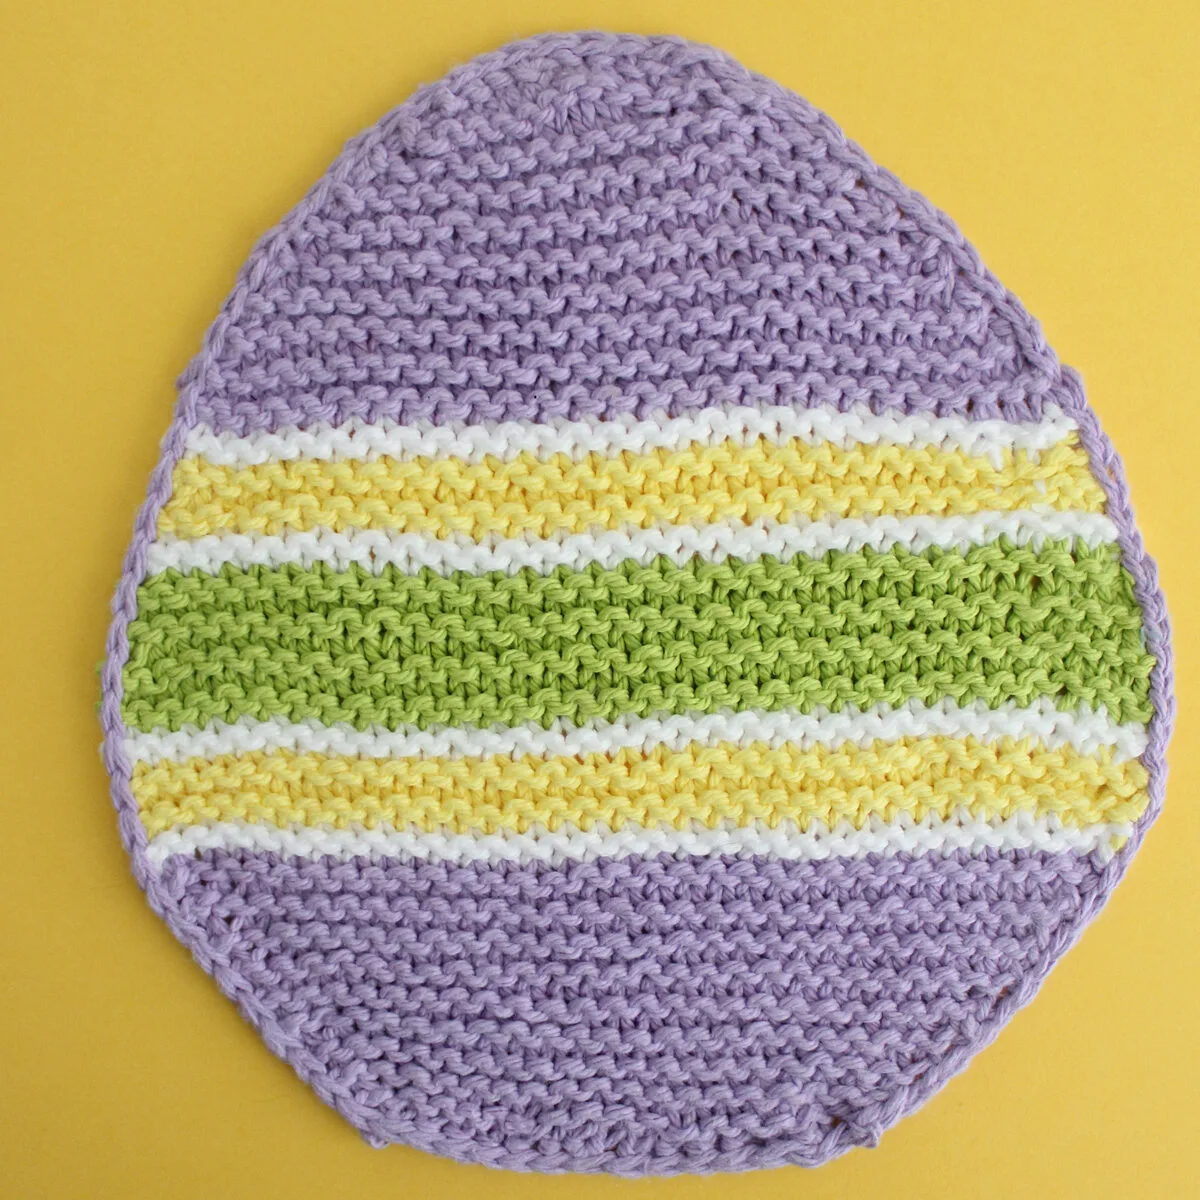 Easter Egg Dishcloth knitted with purple and yellow yarn colors.